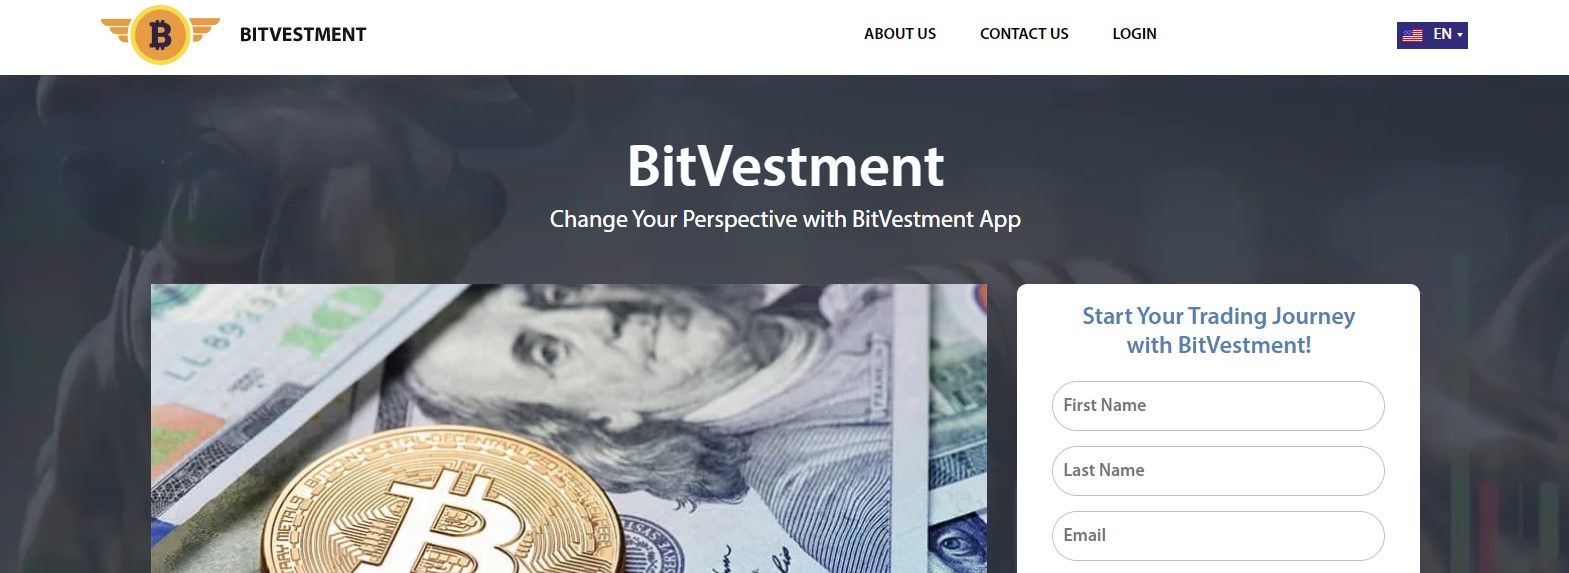 BitVestment: What is It and What Does It Do?